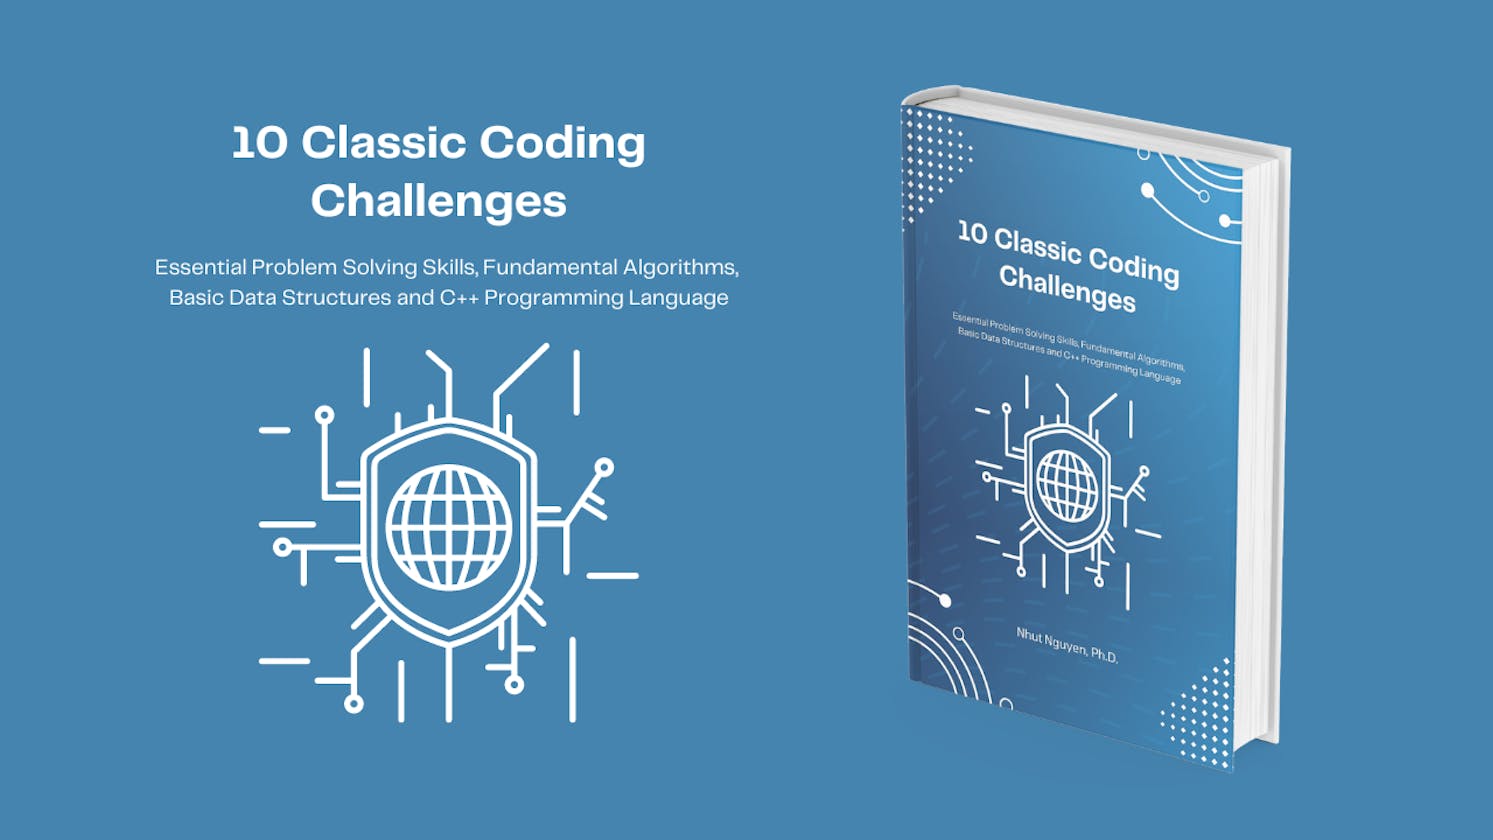 Free eBook "10 Classic Coding Challenges"